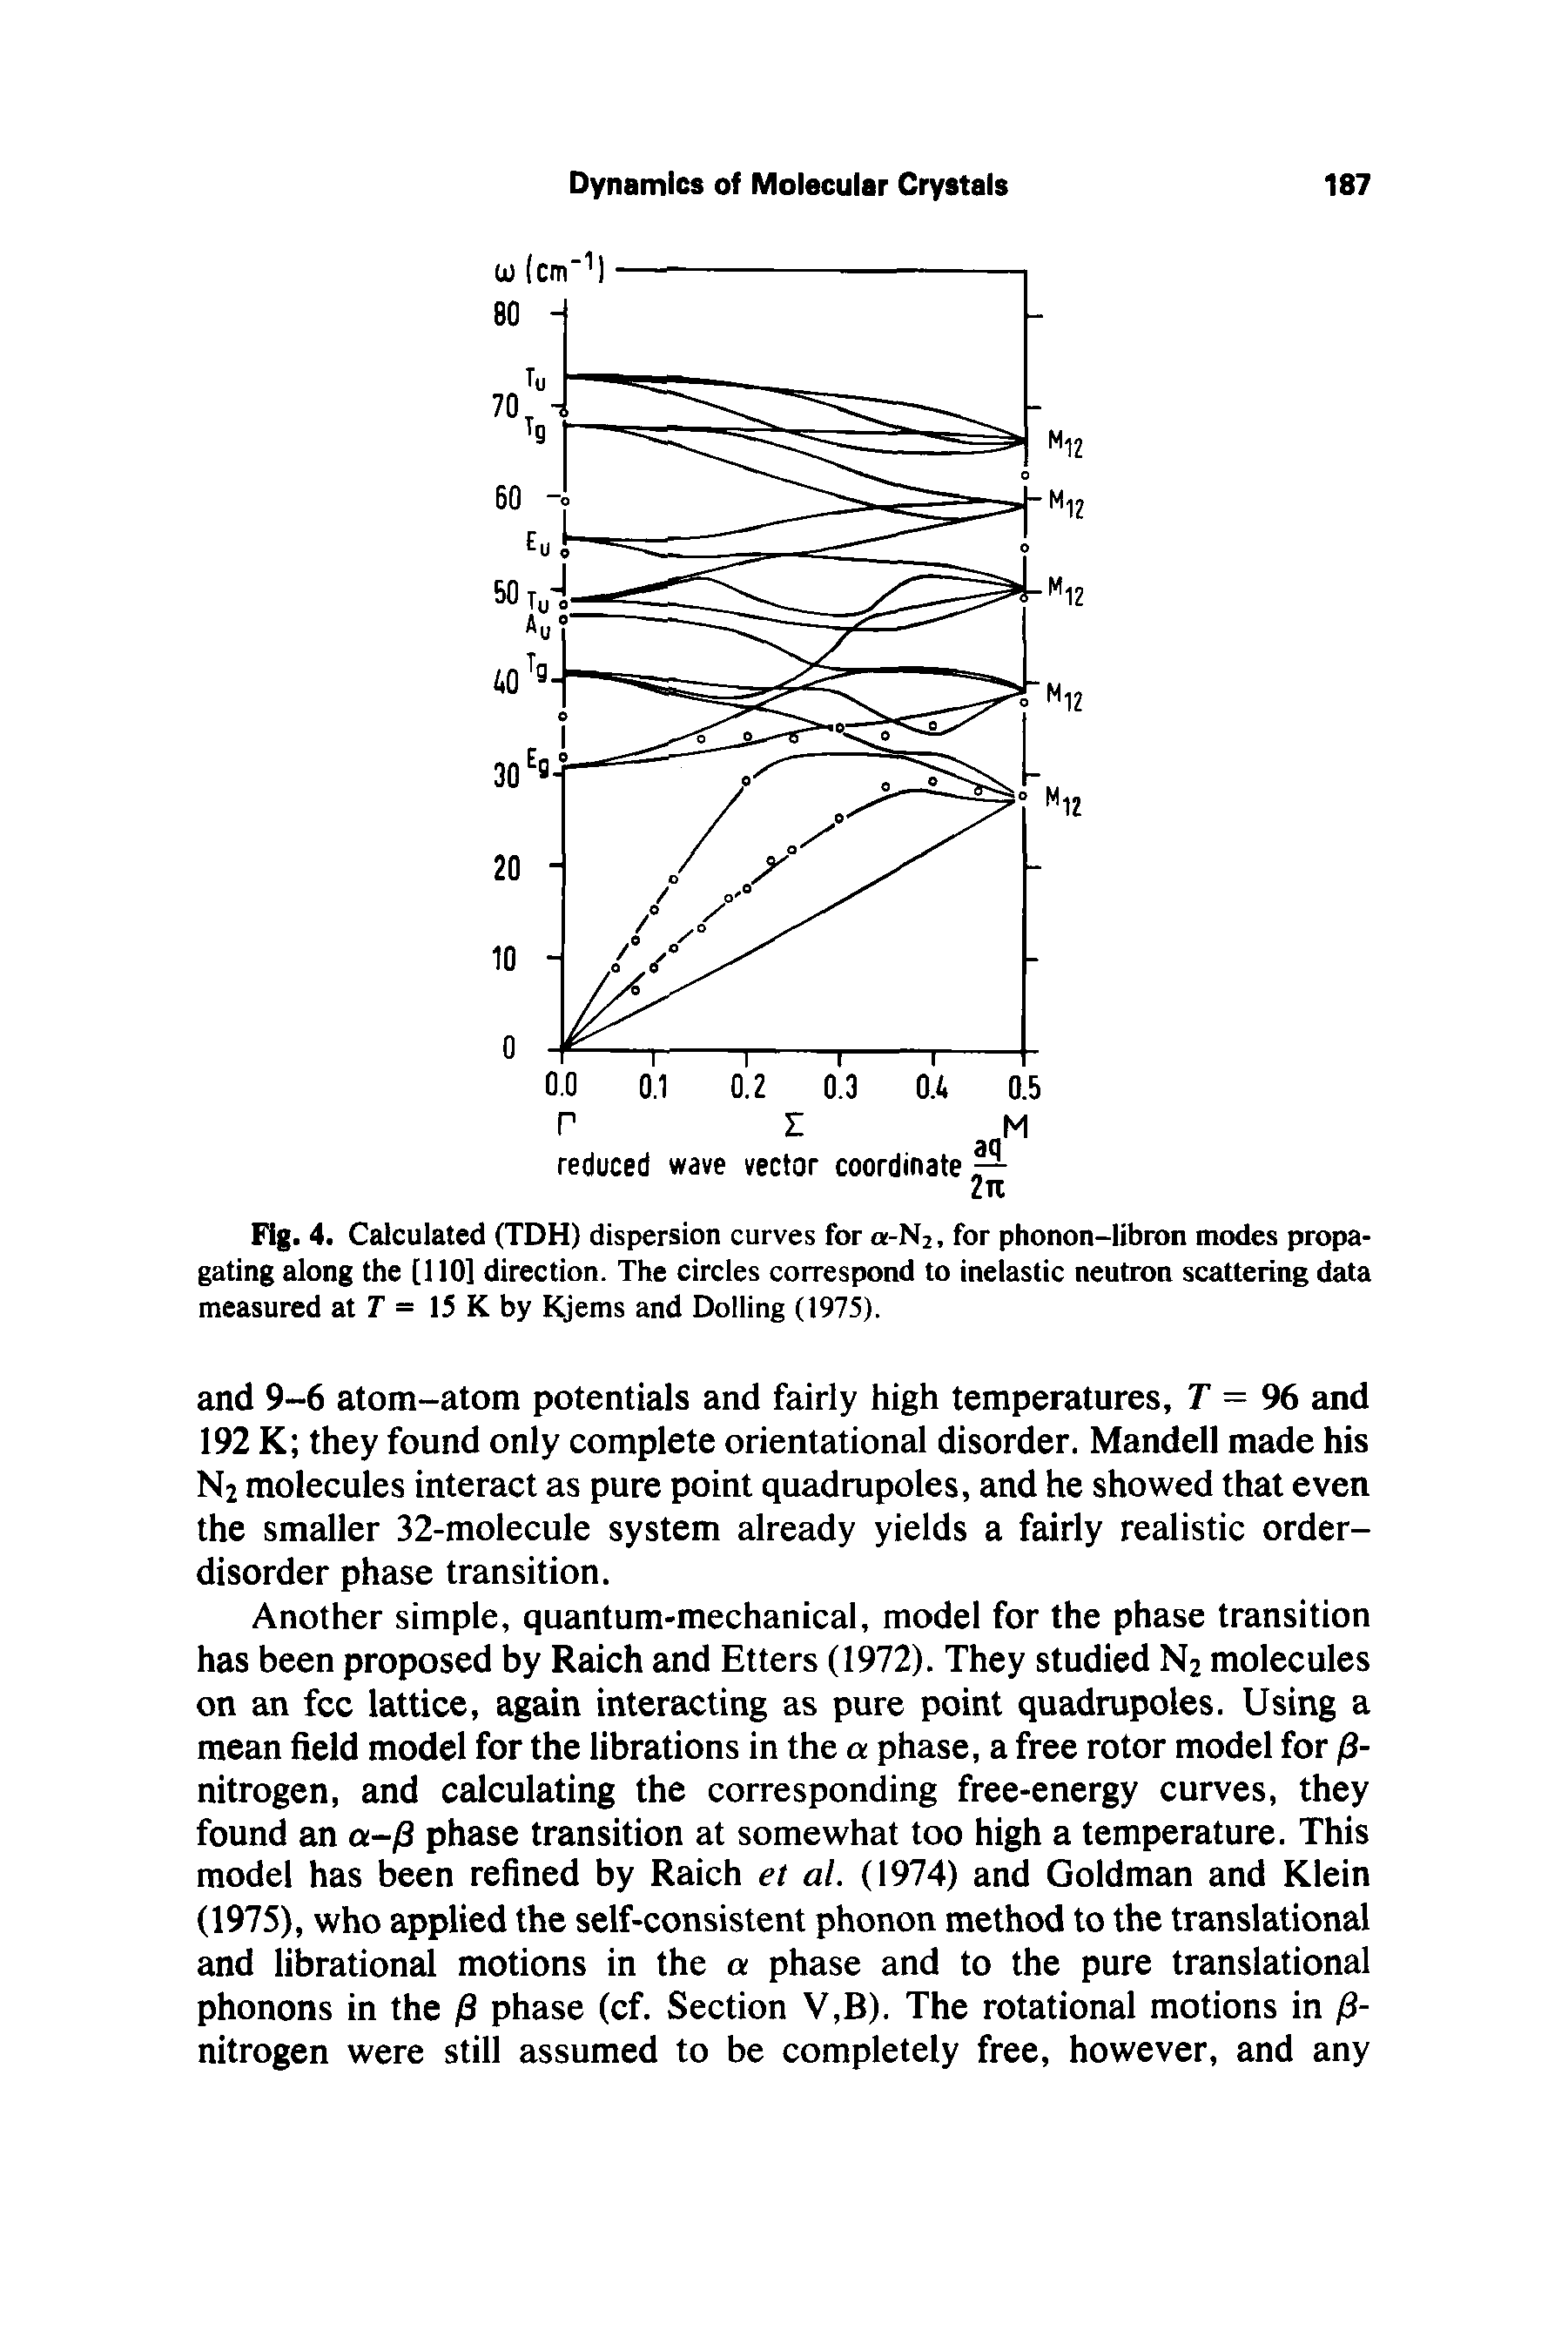 Fig. 4. Calculated (TDH) dispersion curves for a-N2, for phonon-libron modes propagating along the [110] direction. The circles correspond to inelastic neutron scattering data measured at T = 15 K by Kjems and Dolling (1975).